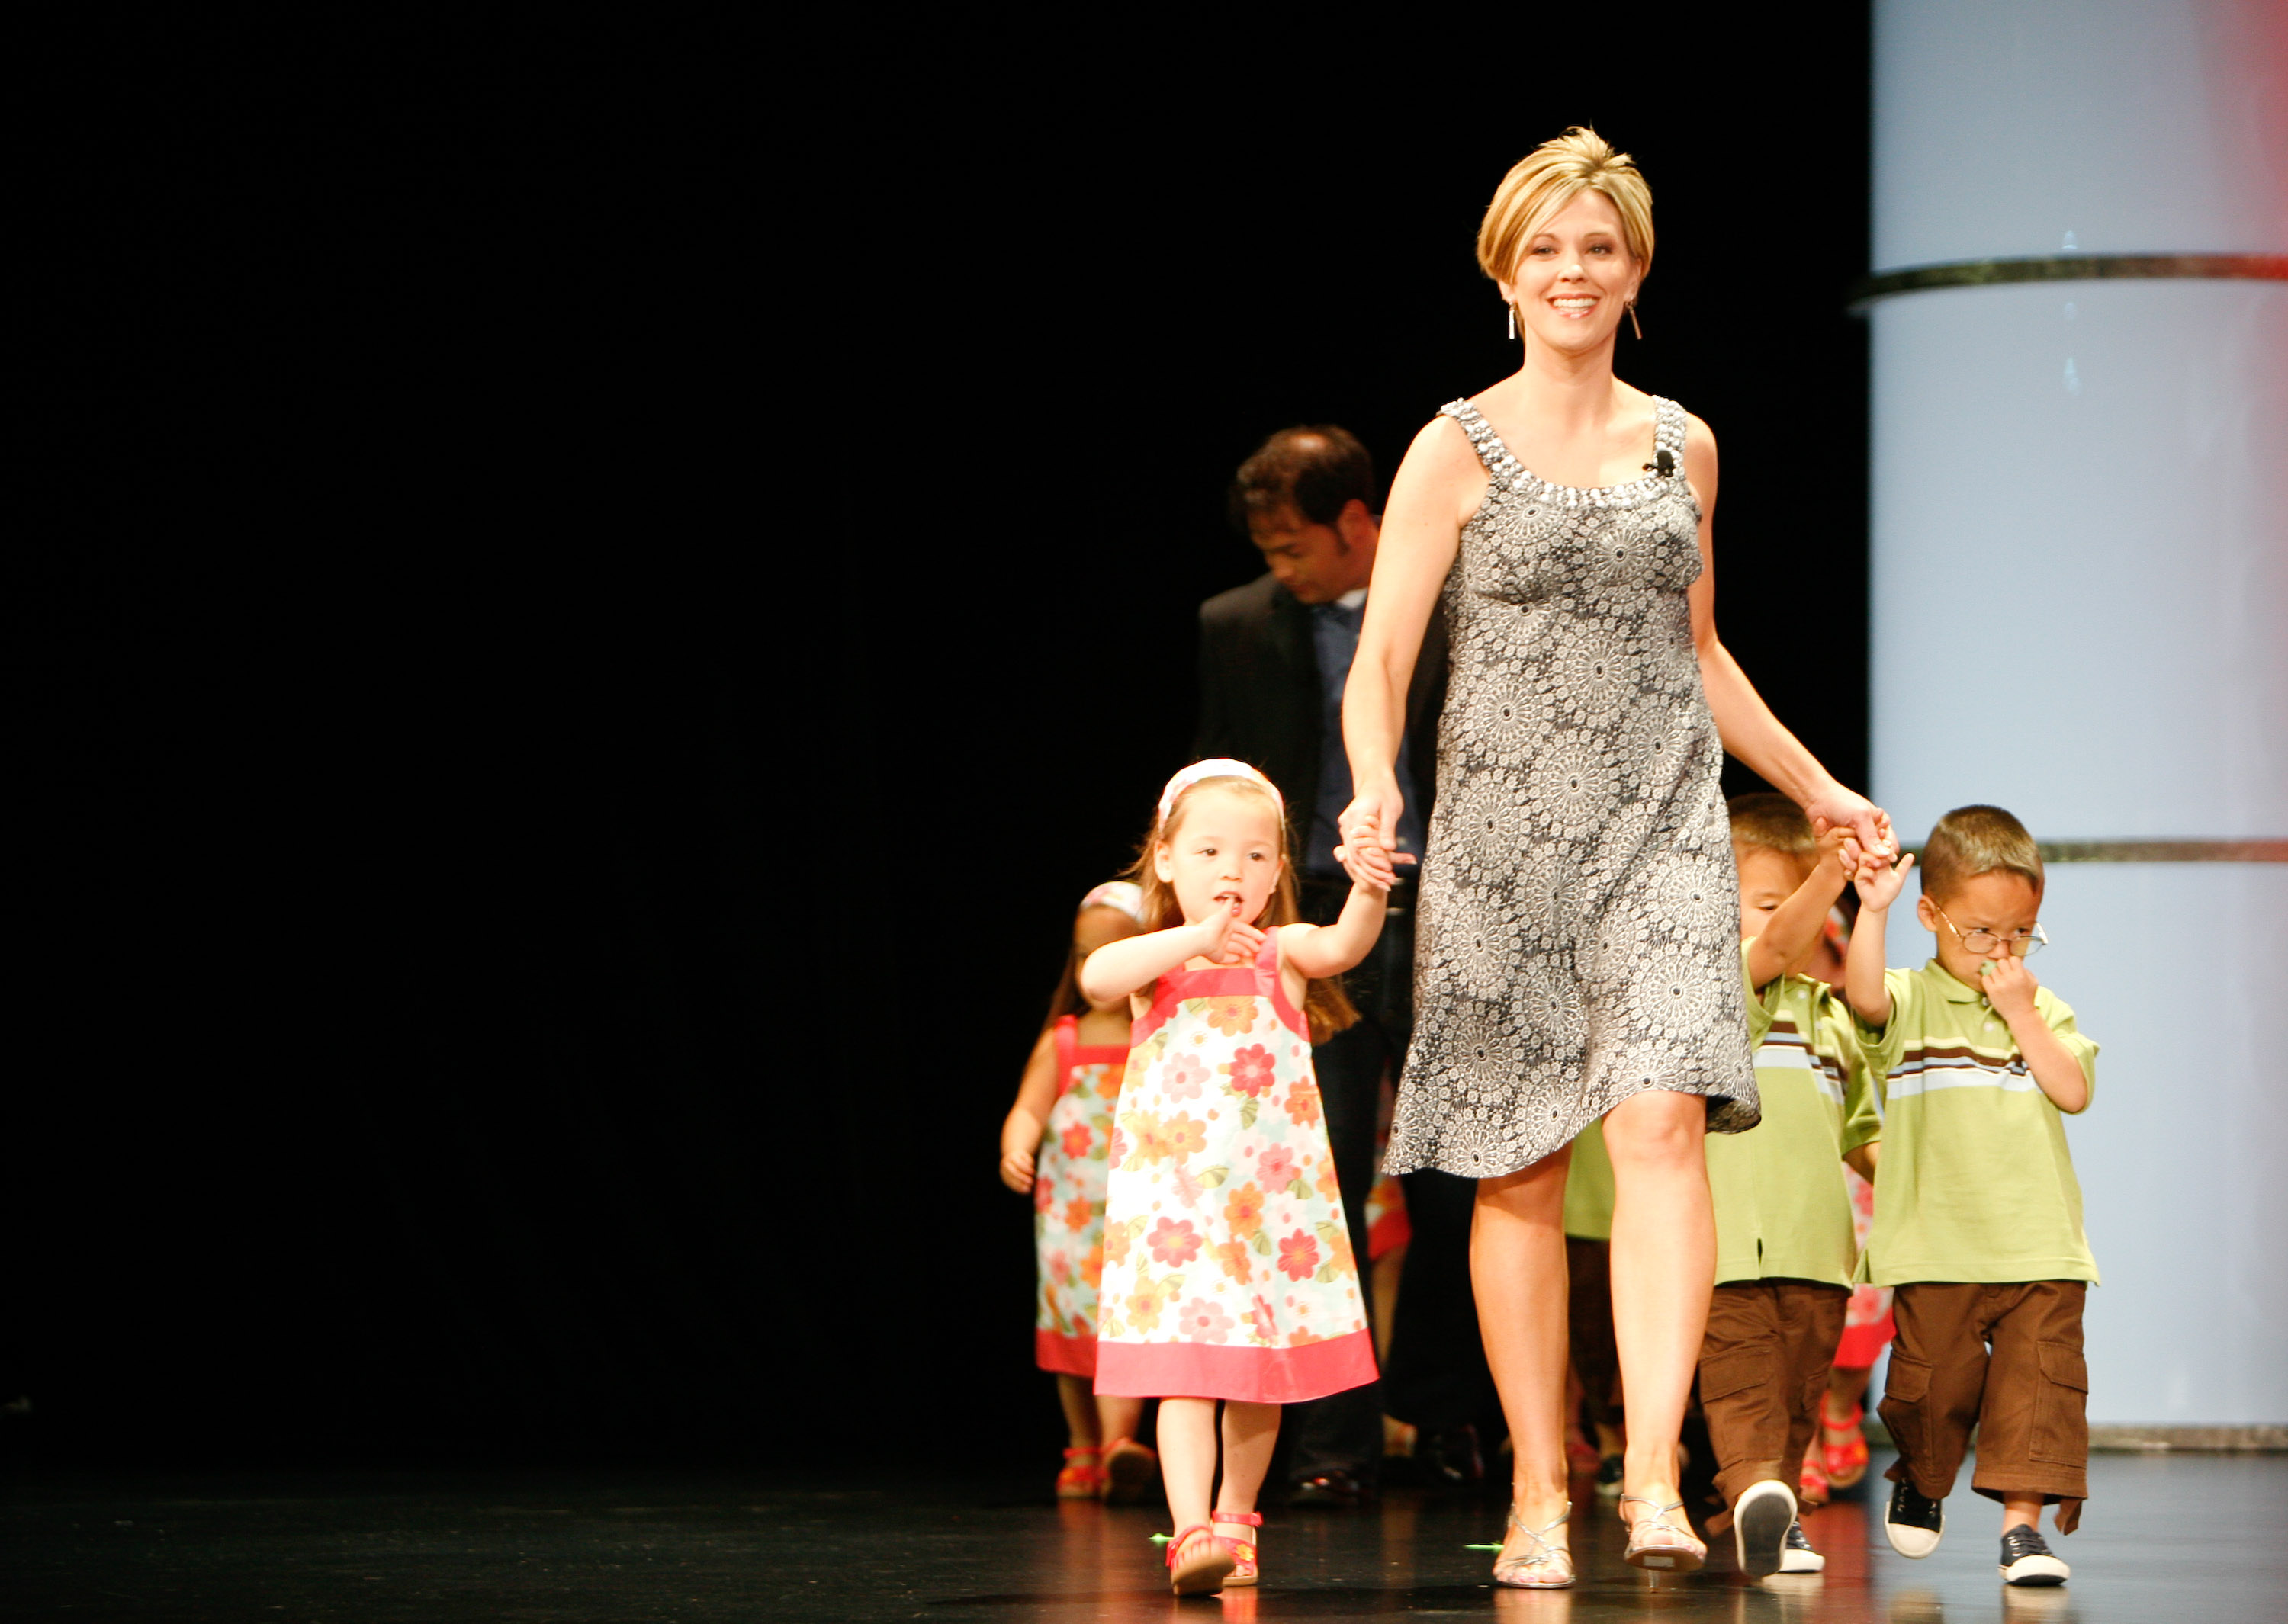 Kate Gosselin walks on stage at the Discovery Upfront Eveent in NY in 2008 with her sextuplets. Jon Gosselin is seen in the back